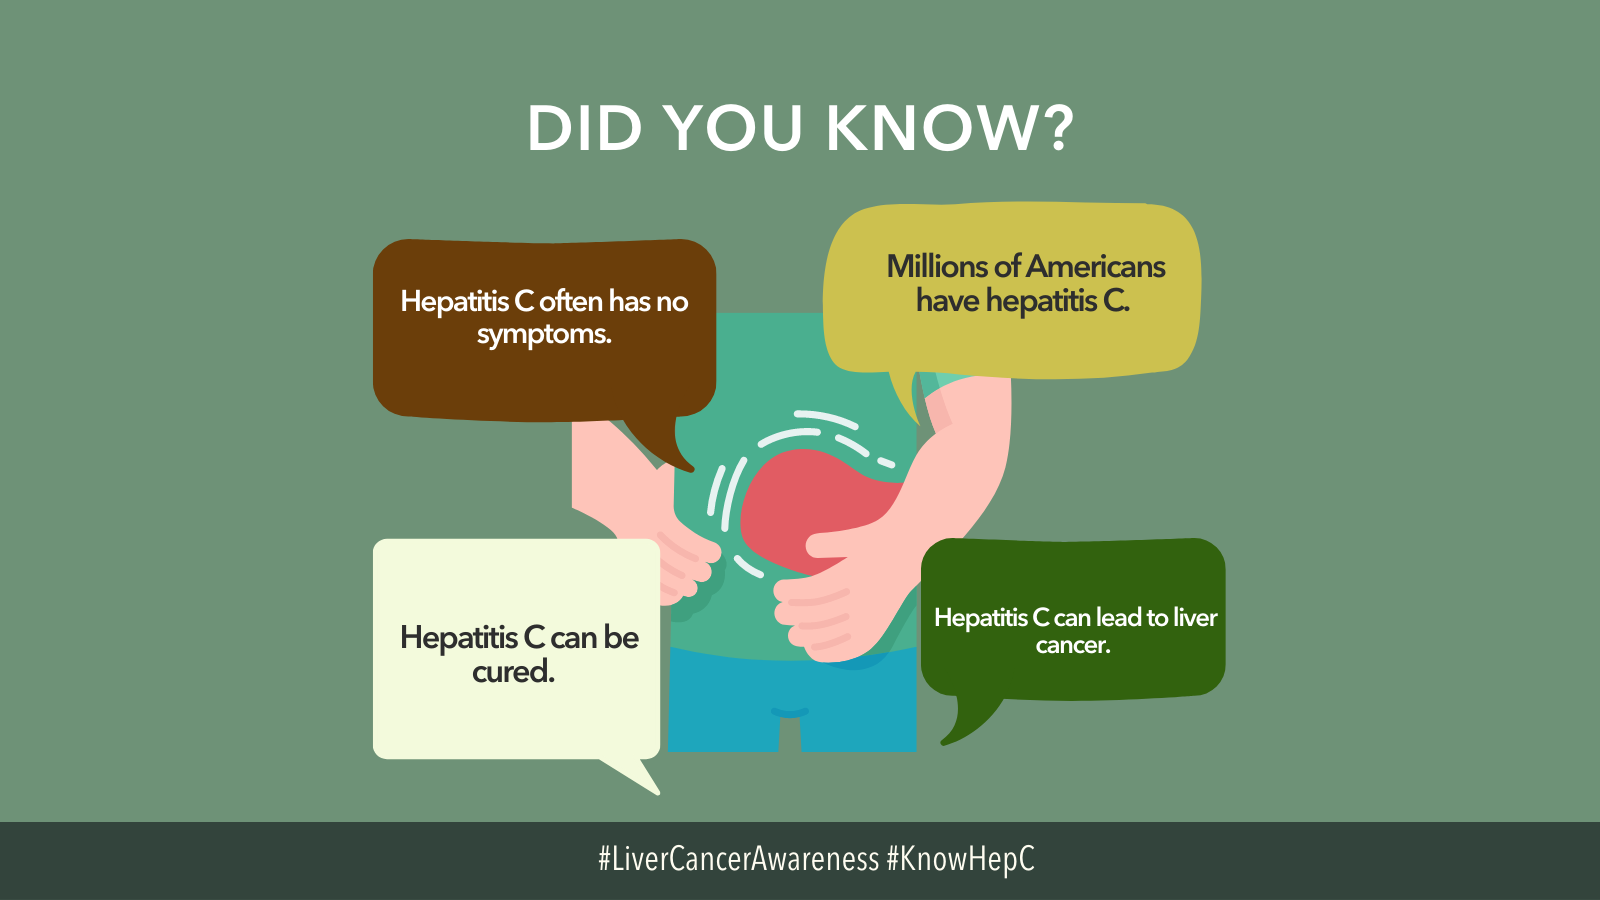 Graphic diagram of comment bubbles with facts related to hepatitis C. Bubbles are centered around a person's liver.